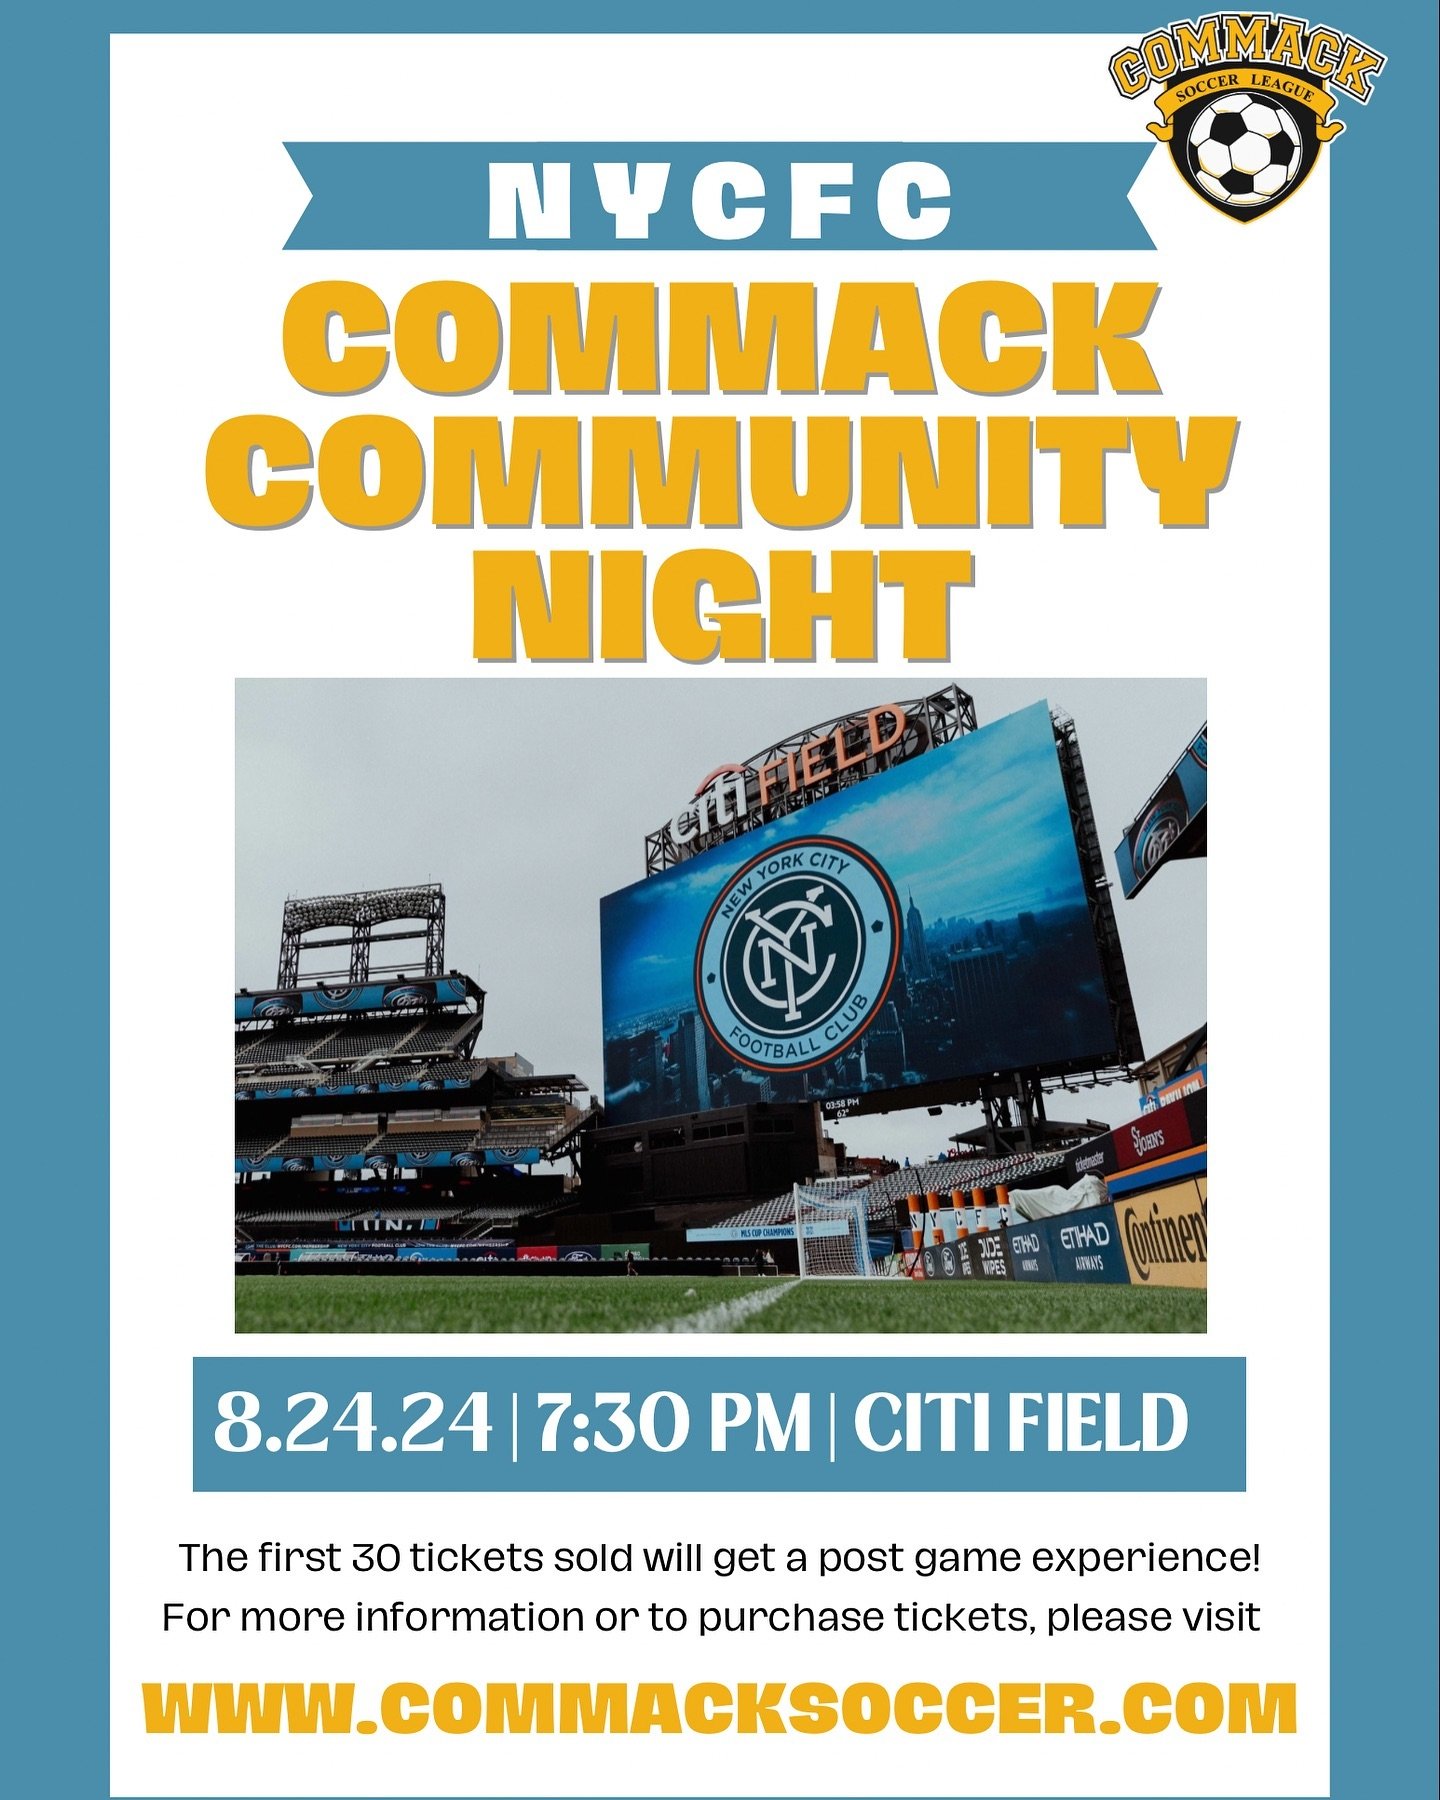 We are proud to announce that Saturday, August 24 is Commack Community Night at the NYCFC v. Chicago Fire game! The game will be played at Citi Field at 7:30 pm, and we will be selling tickets online. The first 30 tickets sold will also include an ex